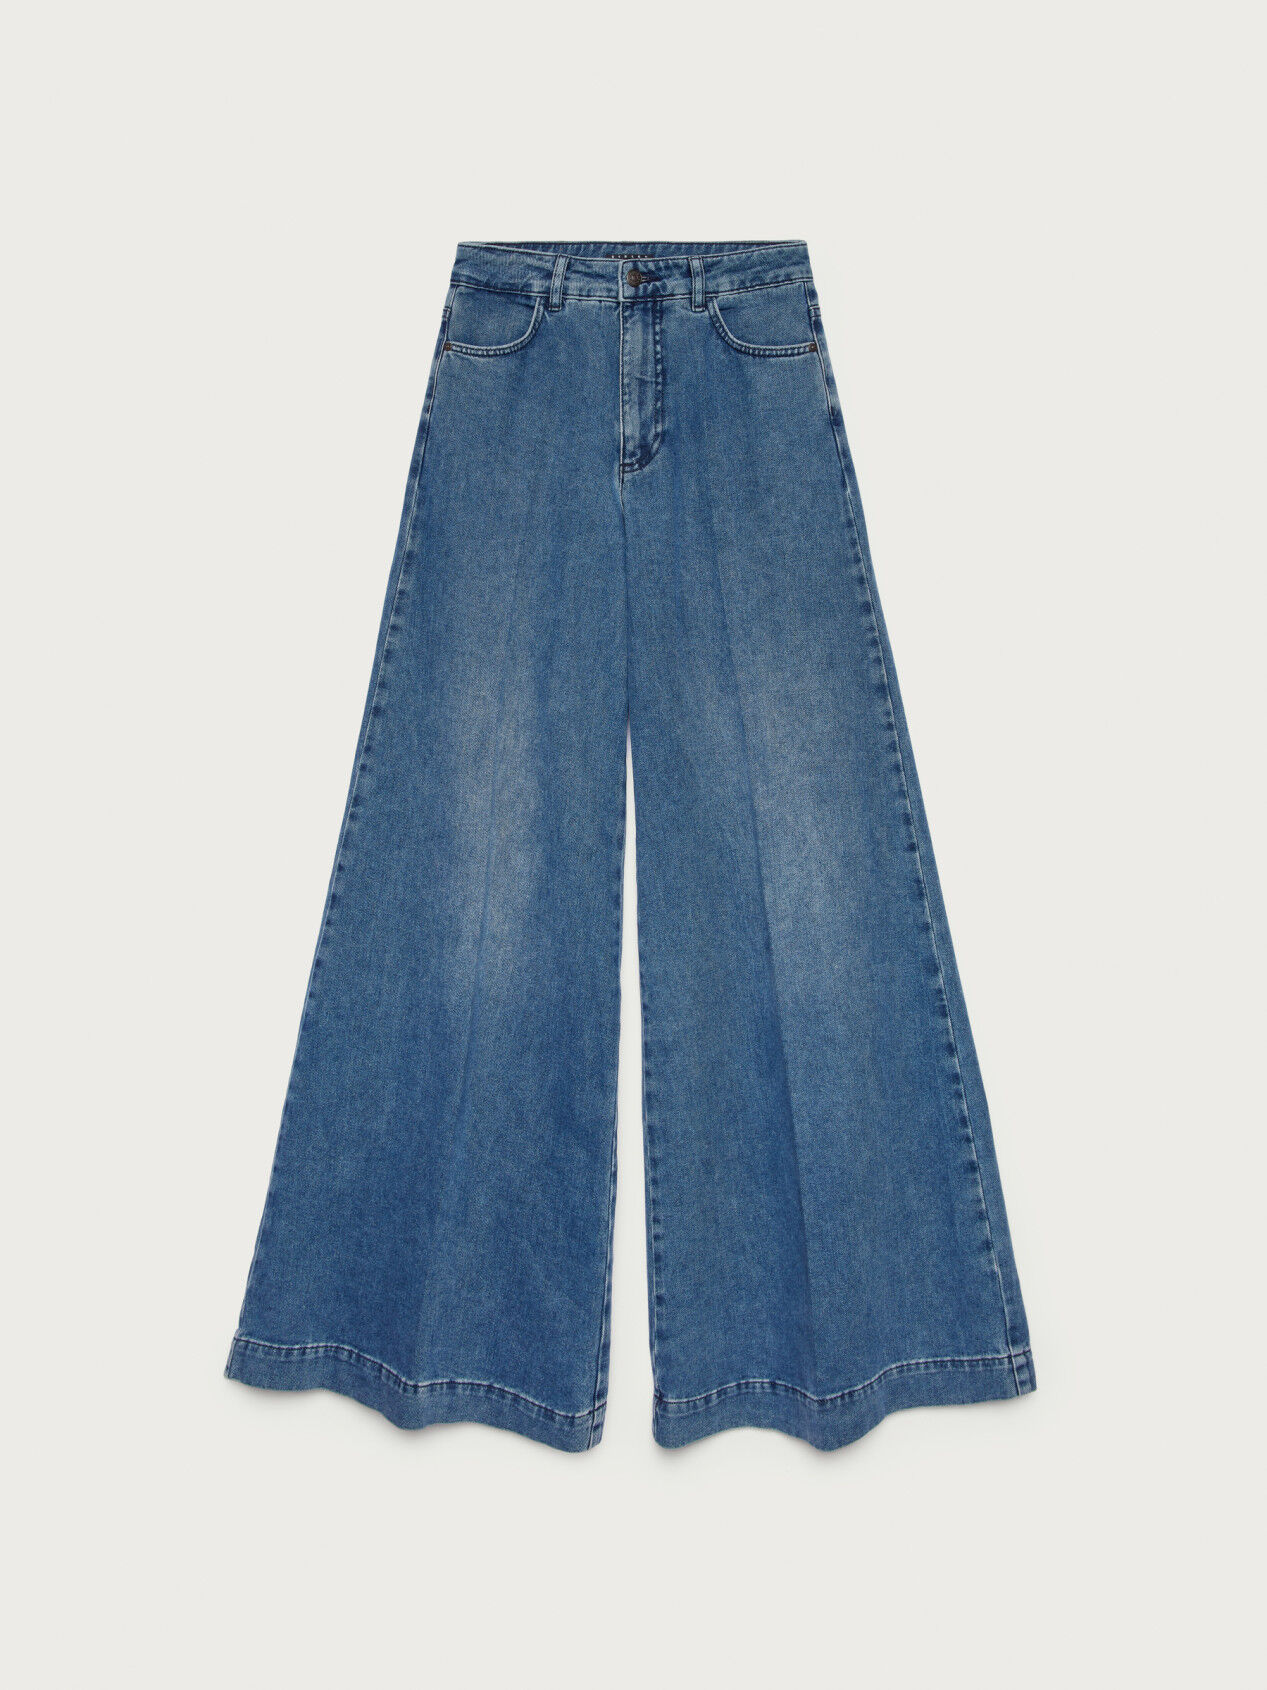 High-waisted palazzo jeans